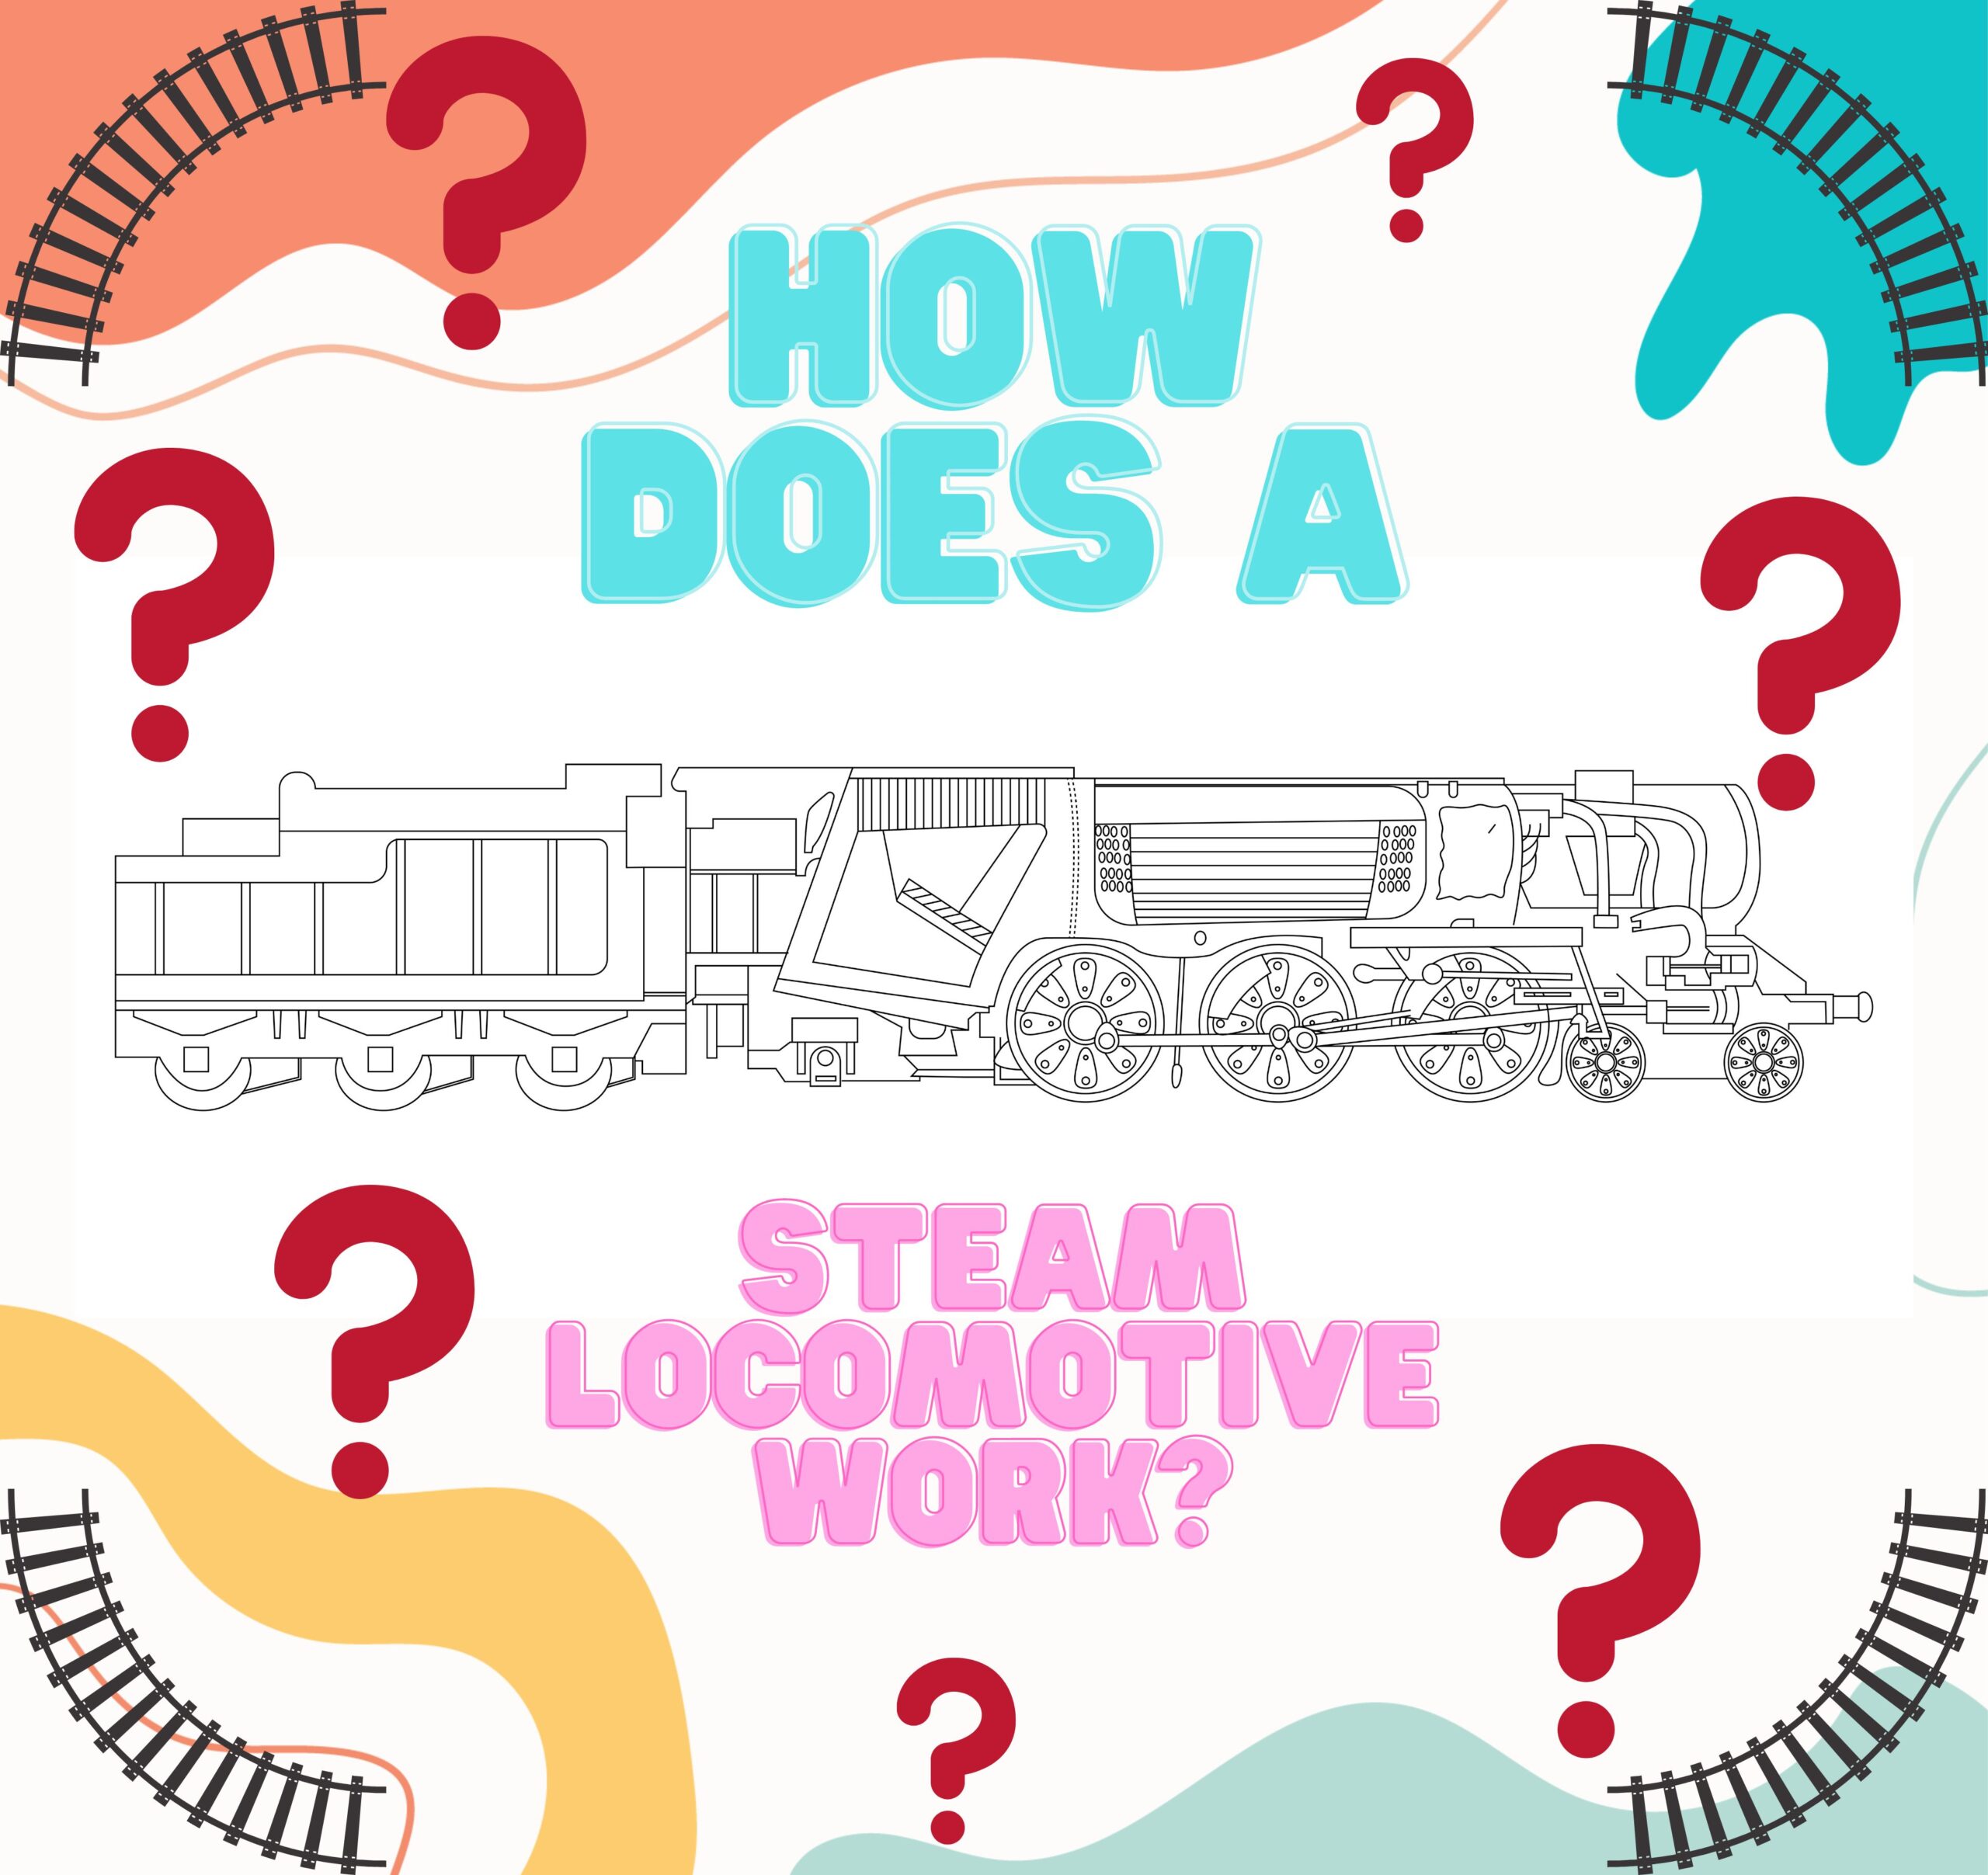 How does a steam locomotive work?